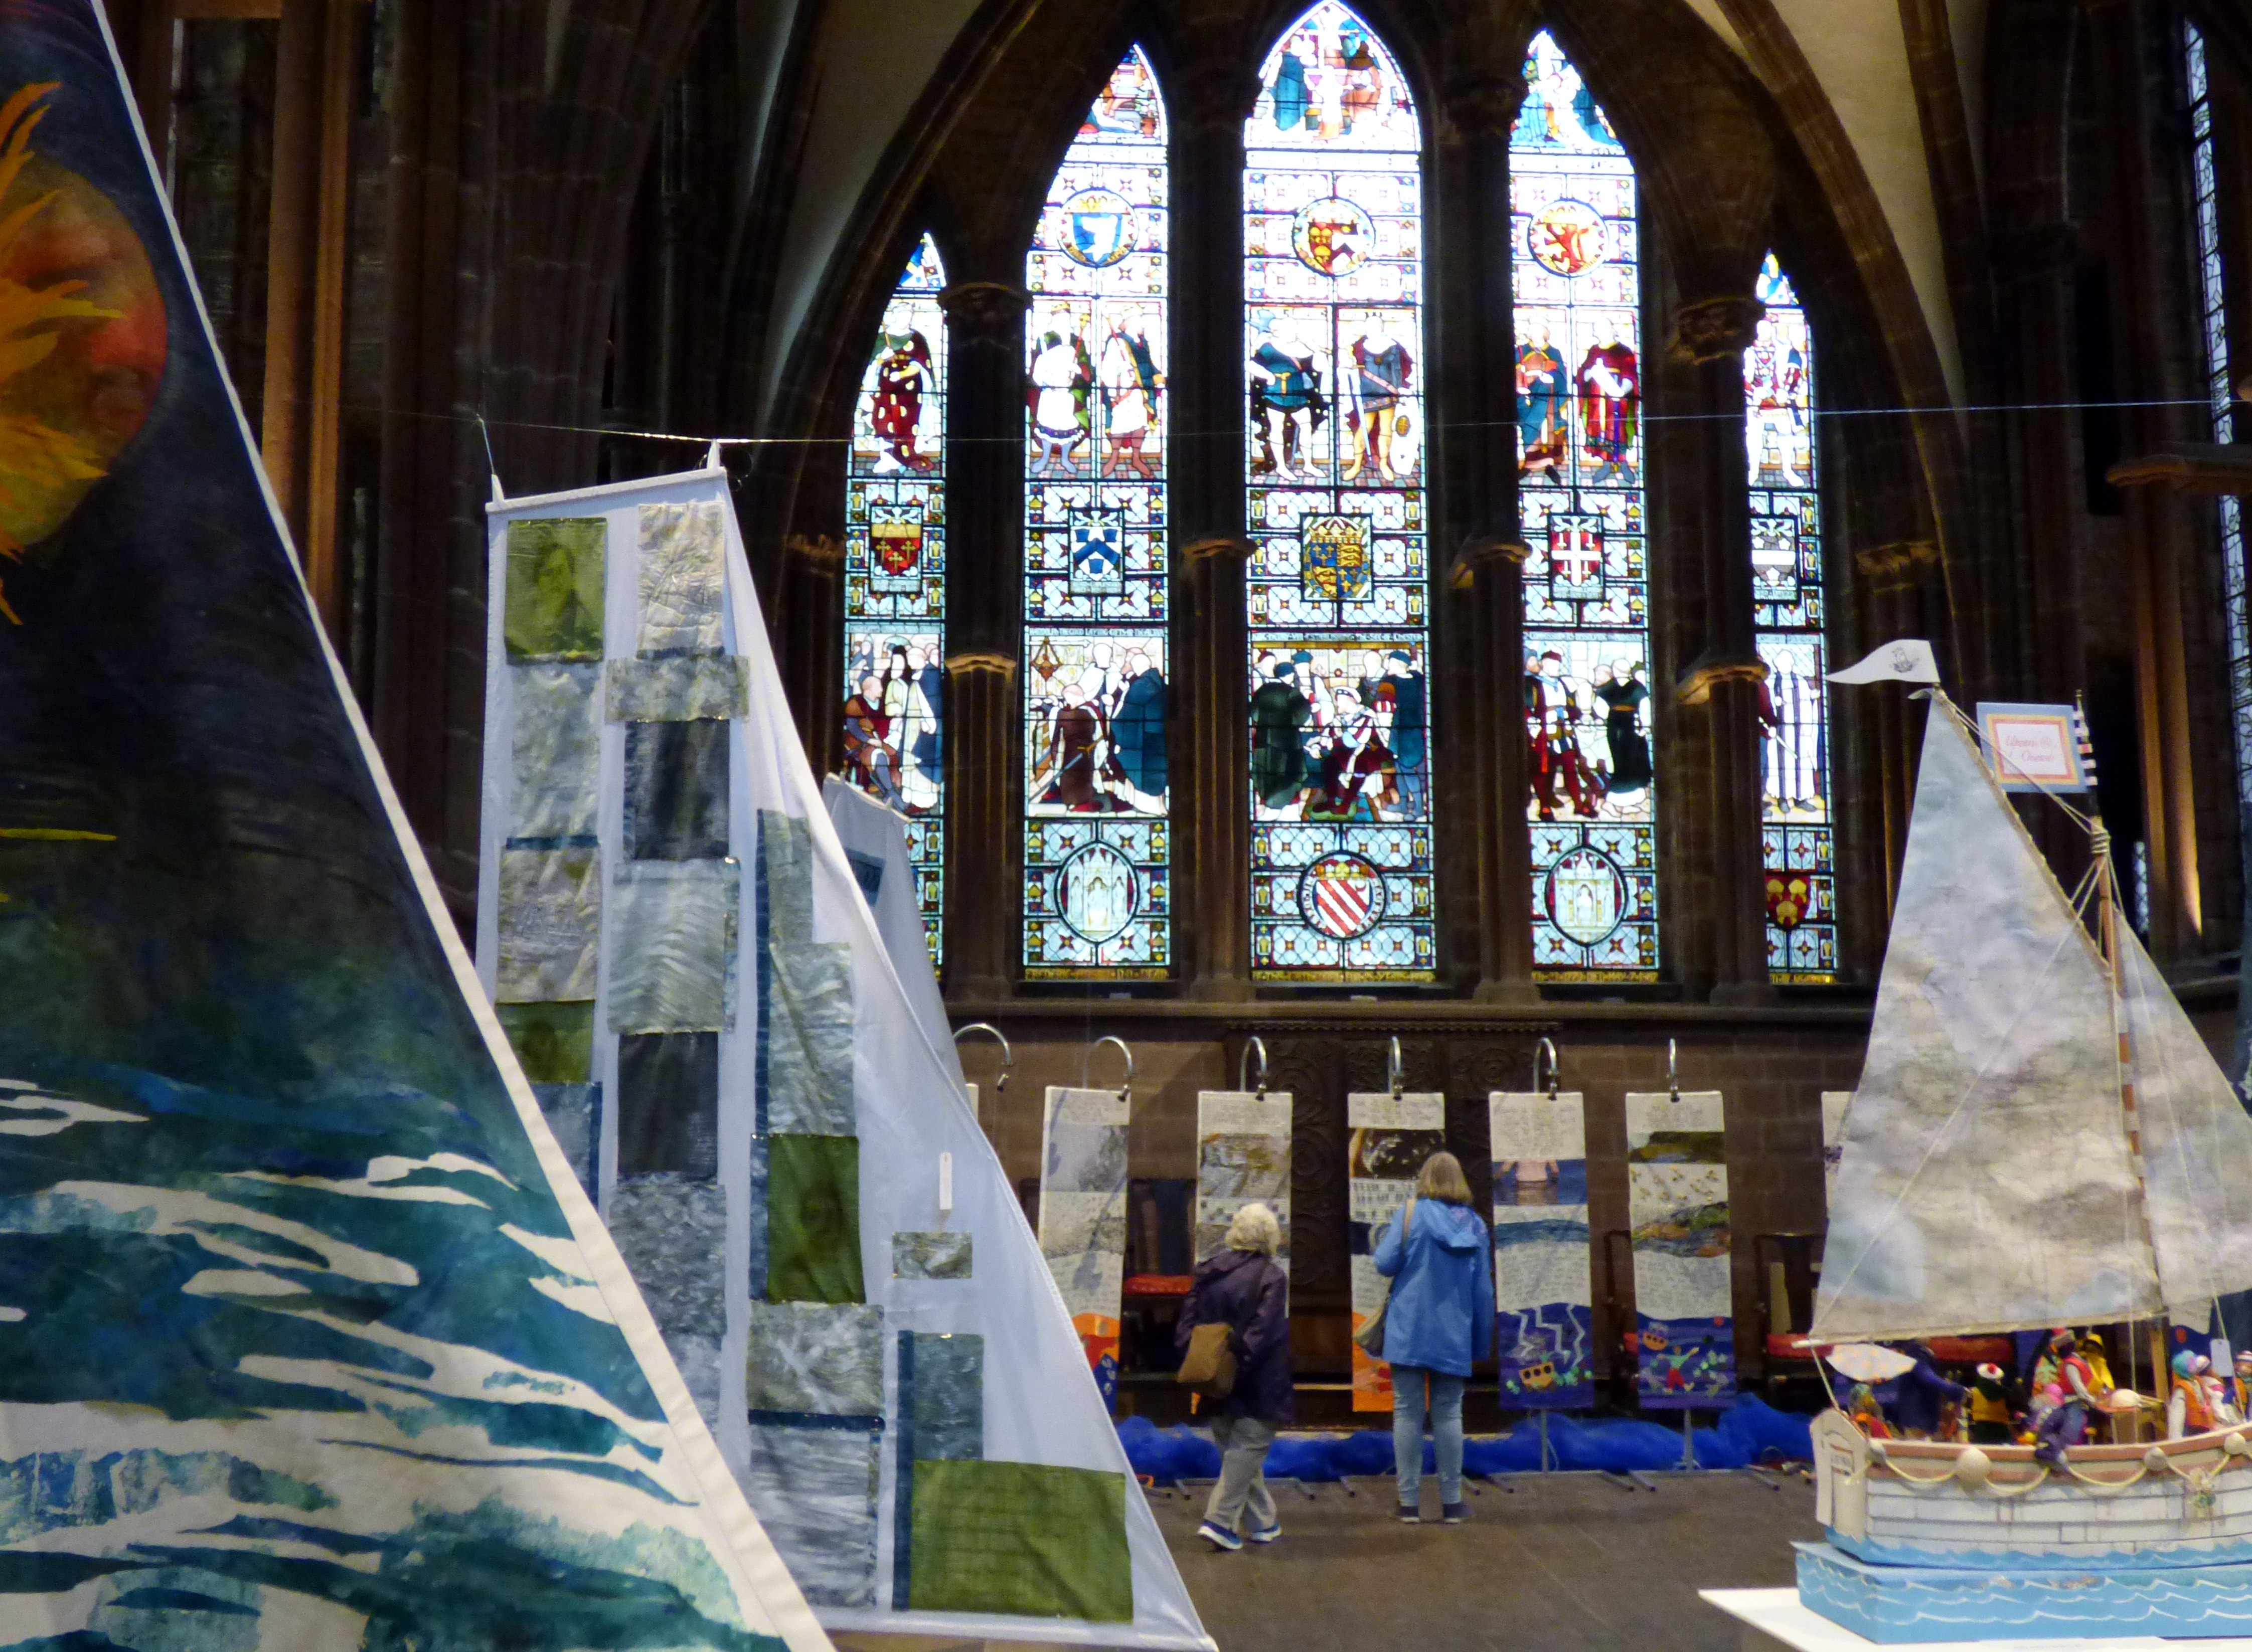 On The Edge Of exhibition By Textile 21 at Chester Cathedral 2019